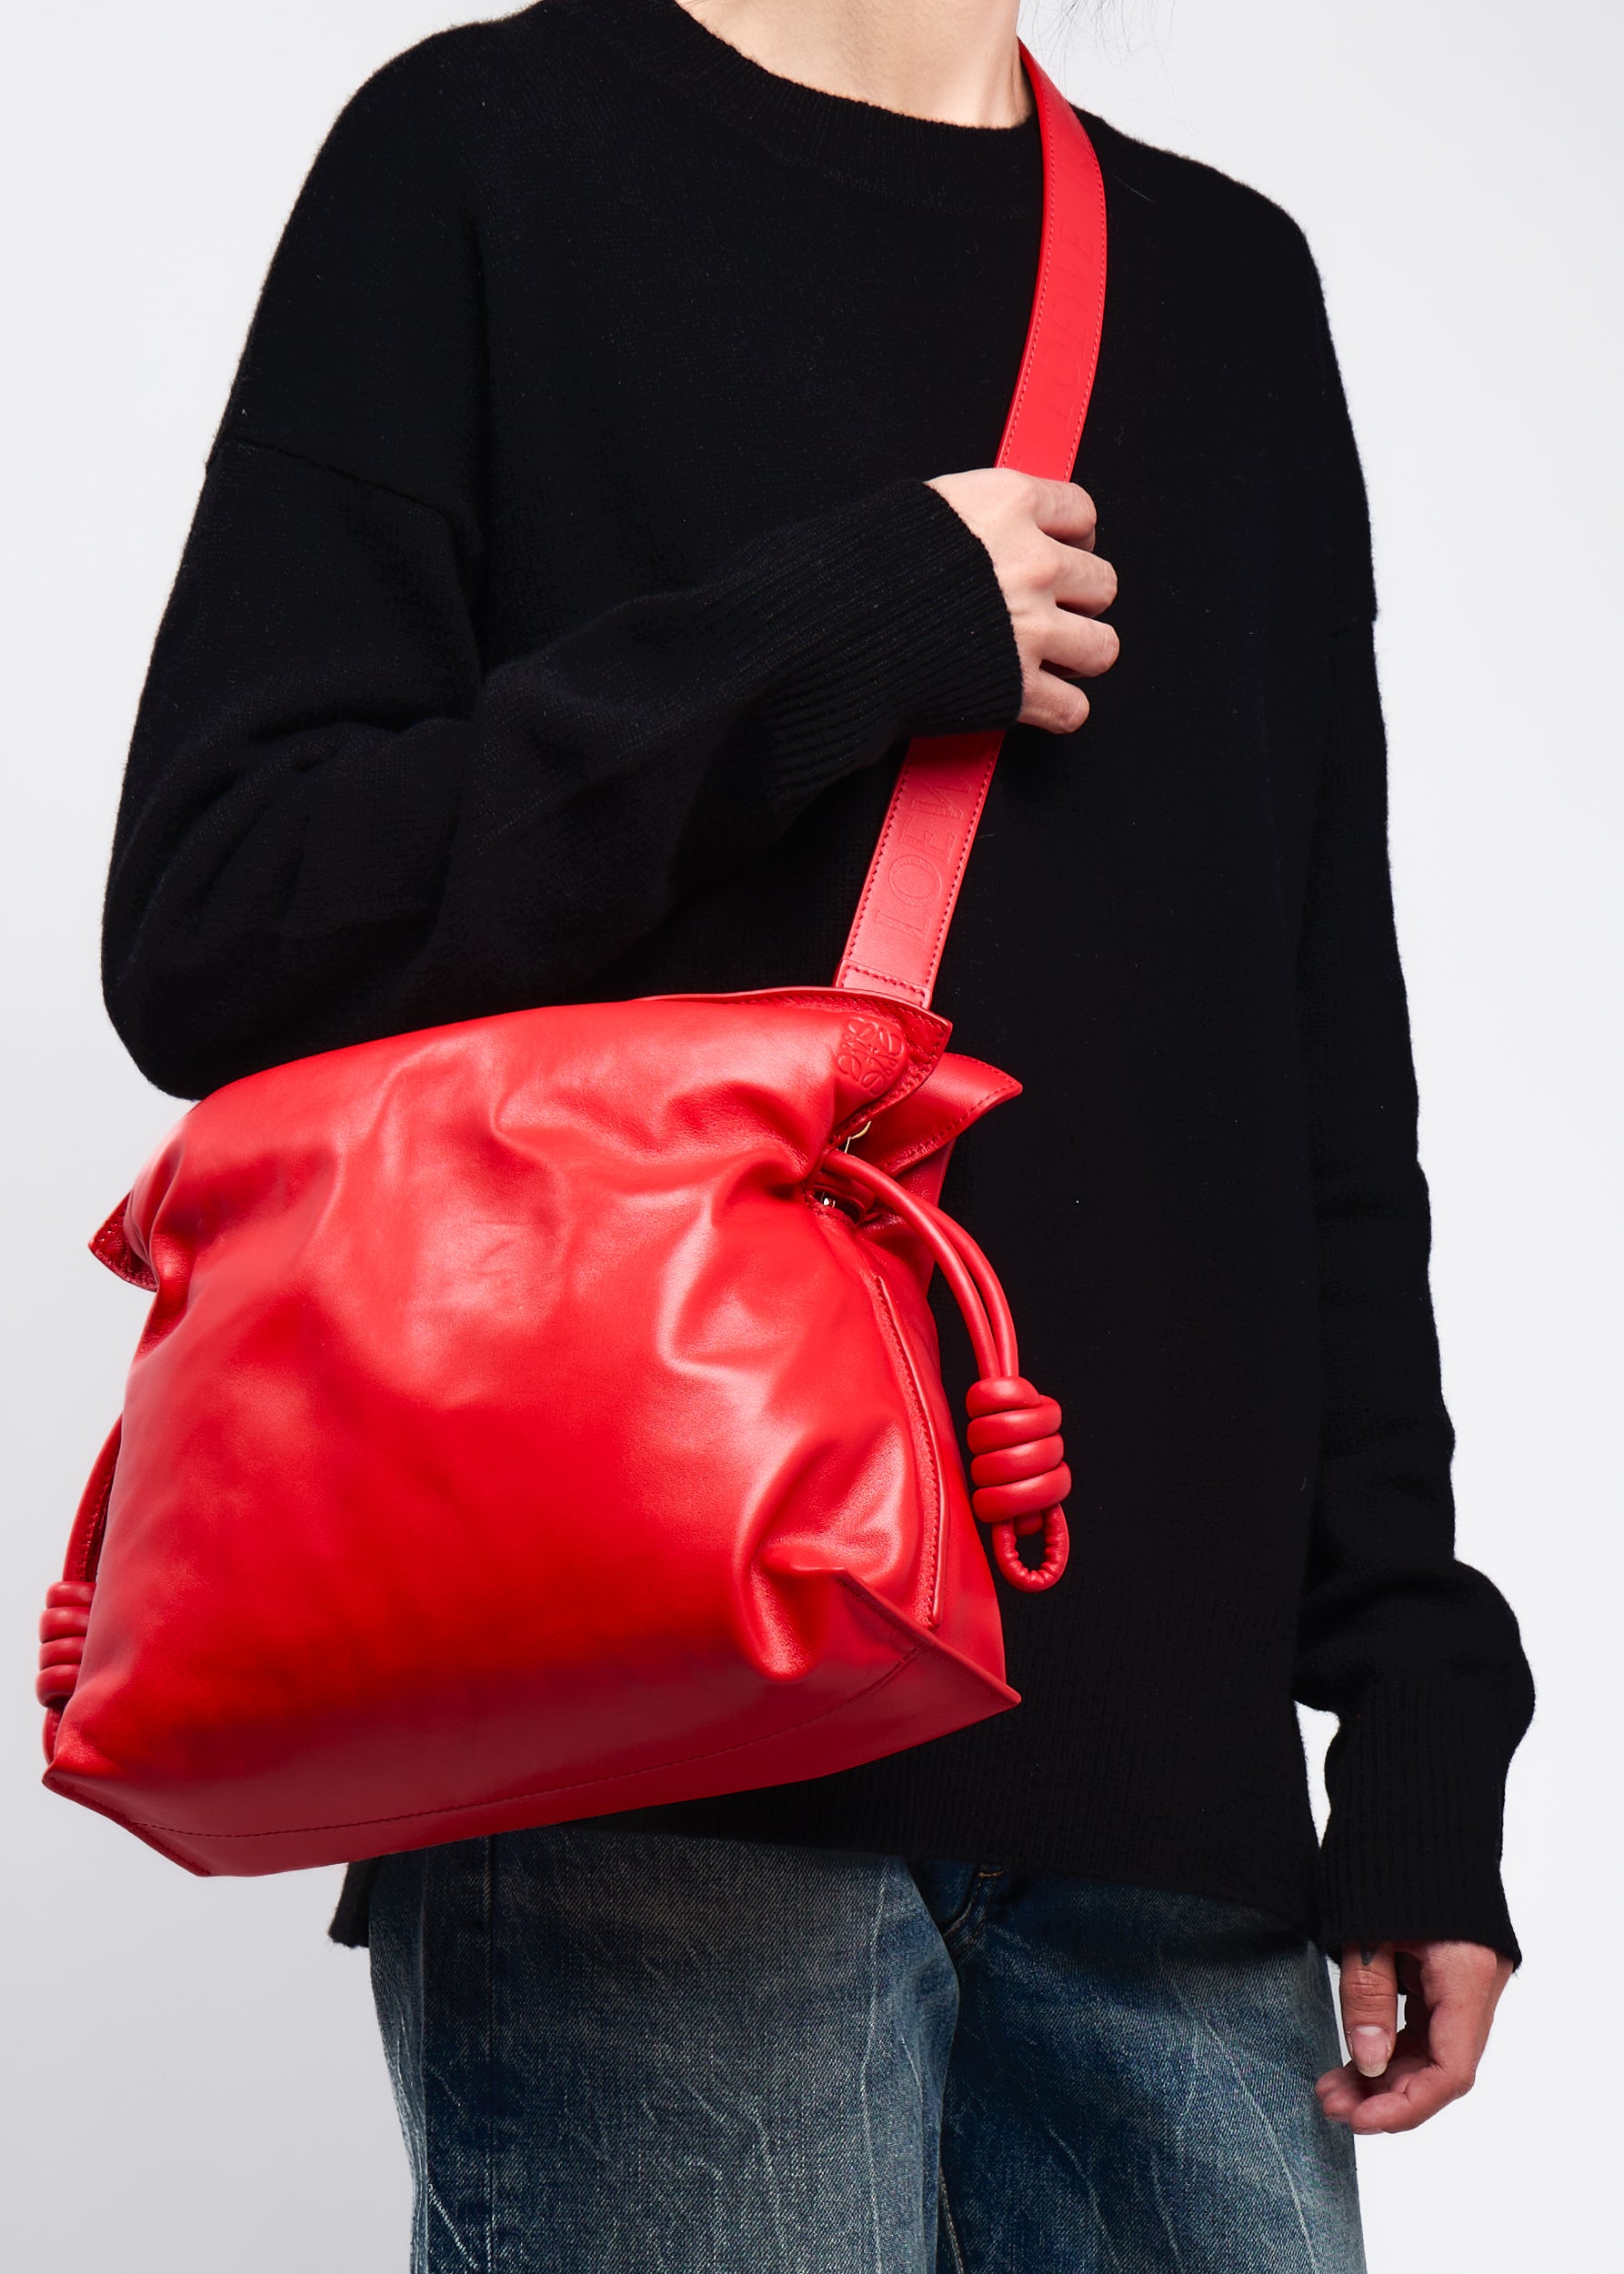 Loewe's Flamenco & Goya Now Come In A Puffy Finish - BAGAHOLICBOY